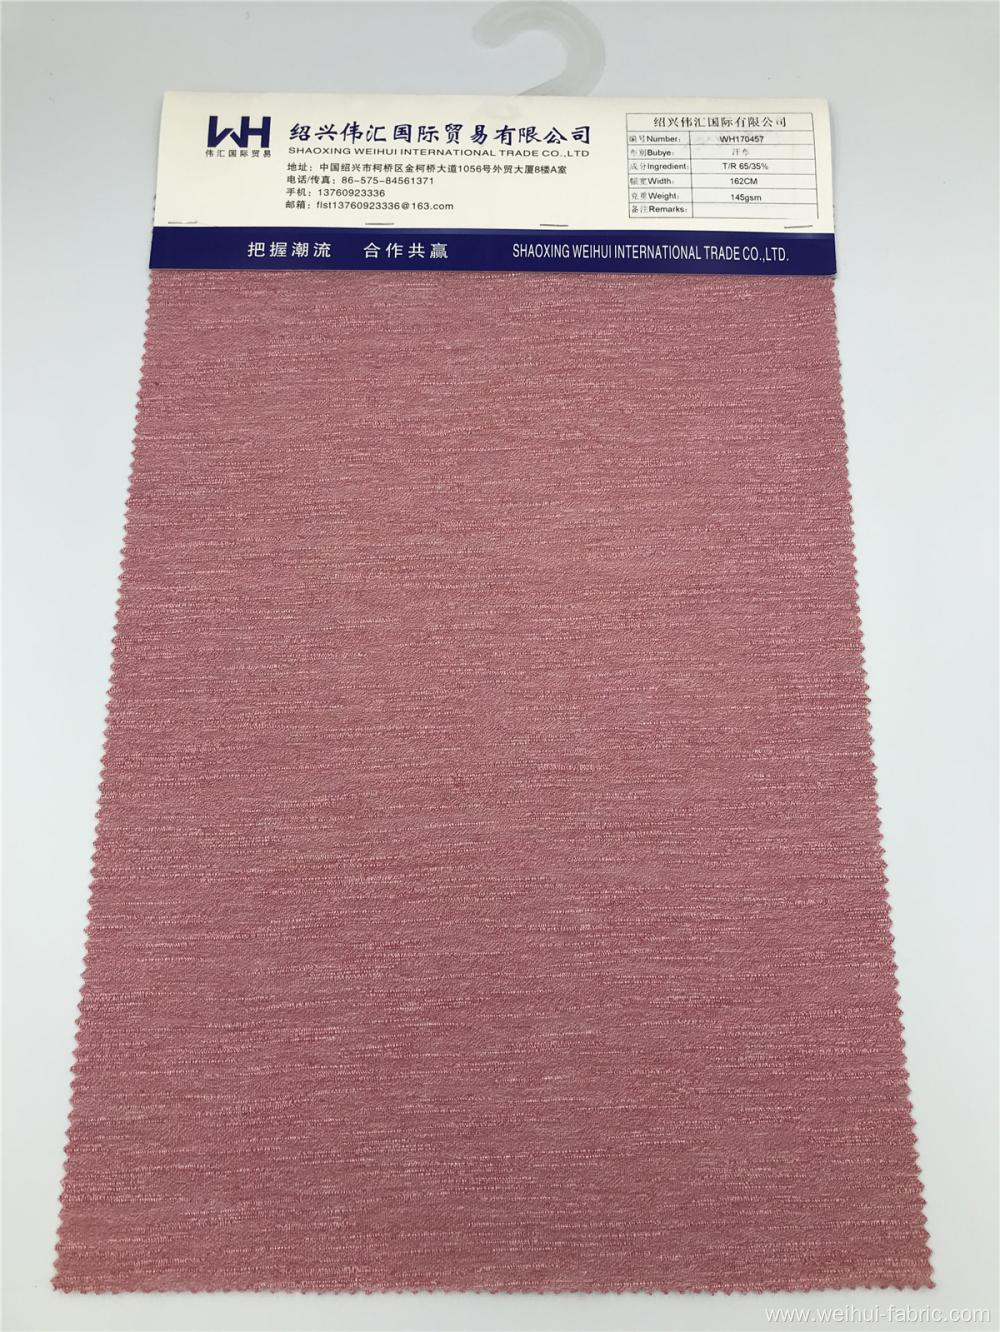 Knitted Jersey Fabric Width 162cm T/R Polyester Fabrics